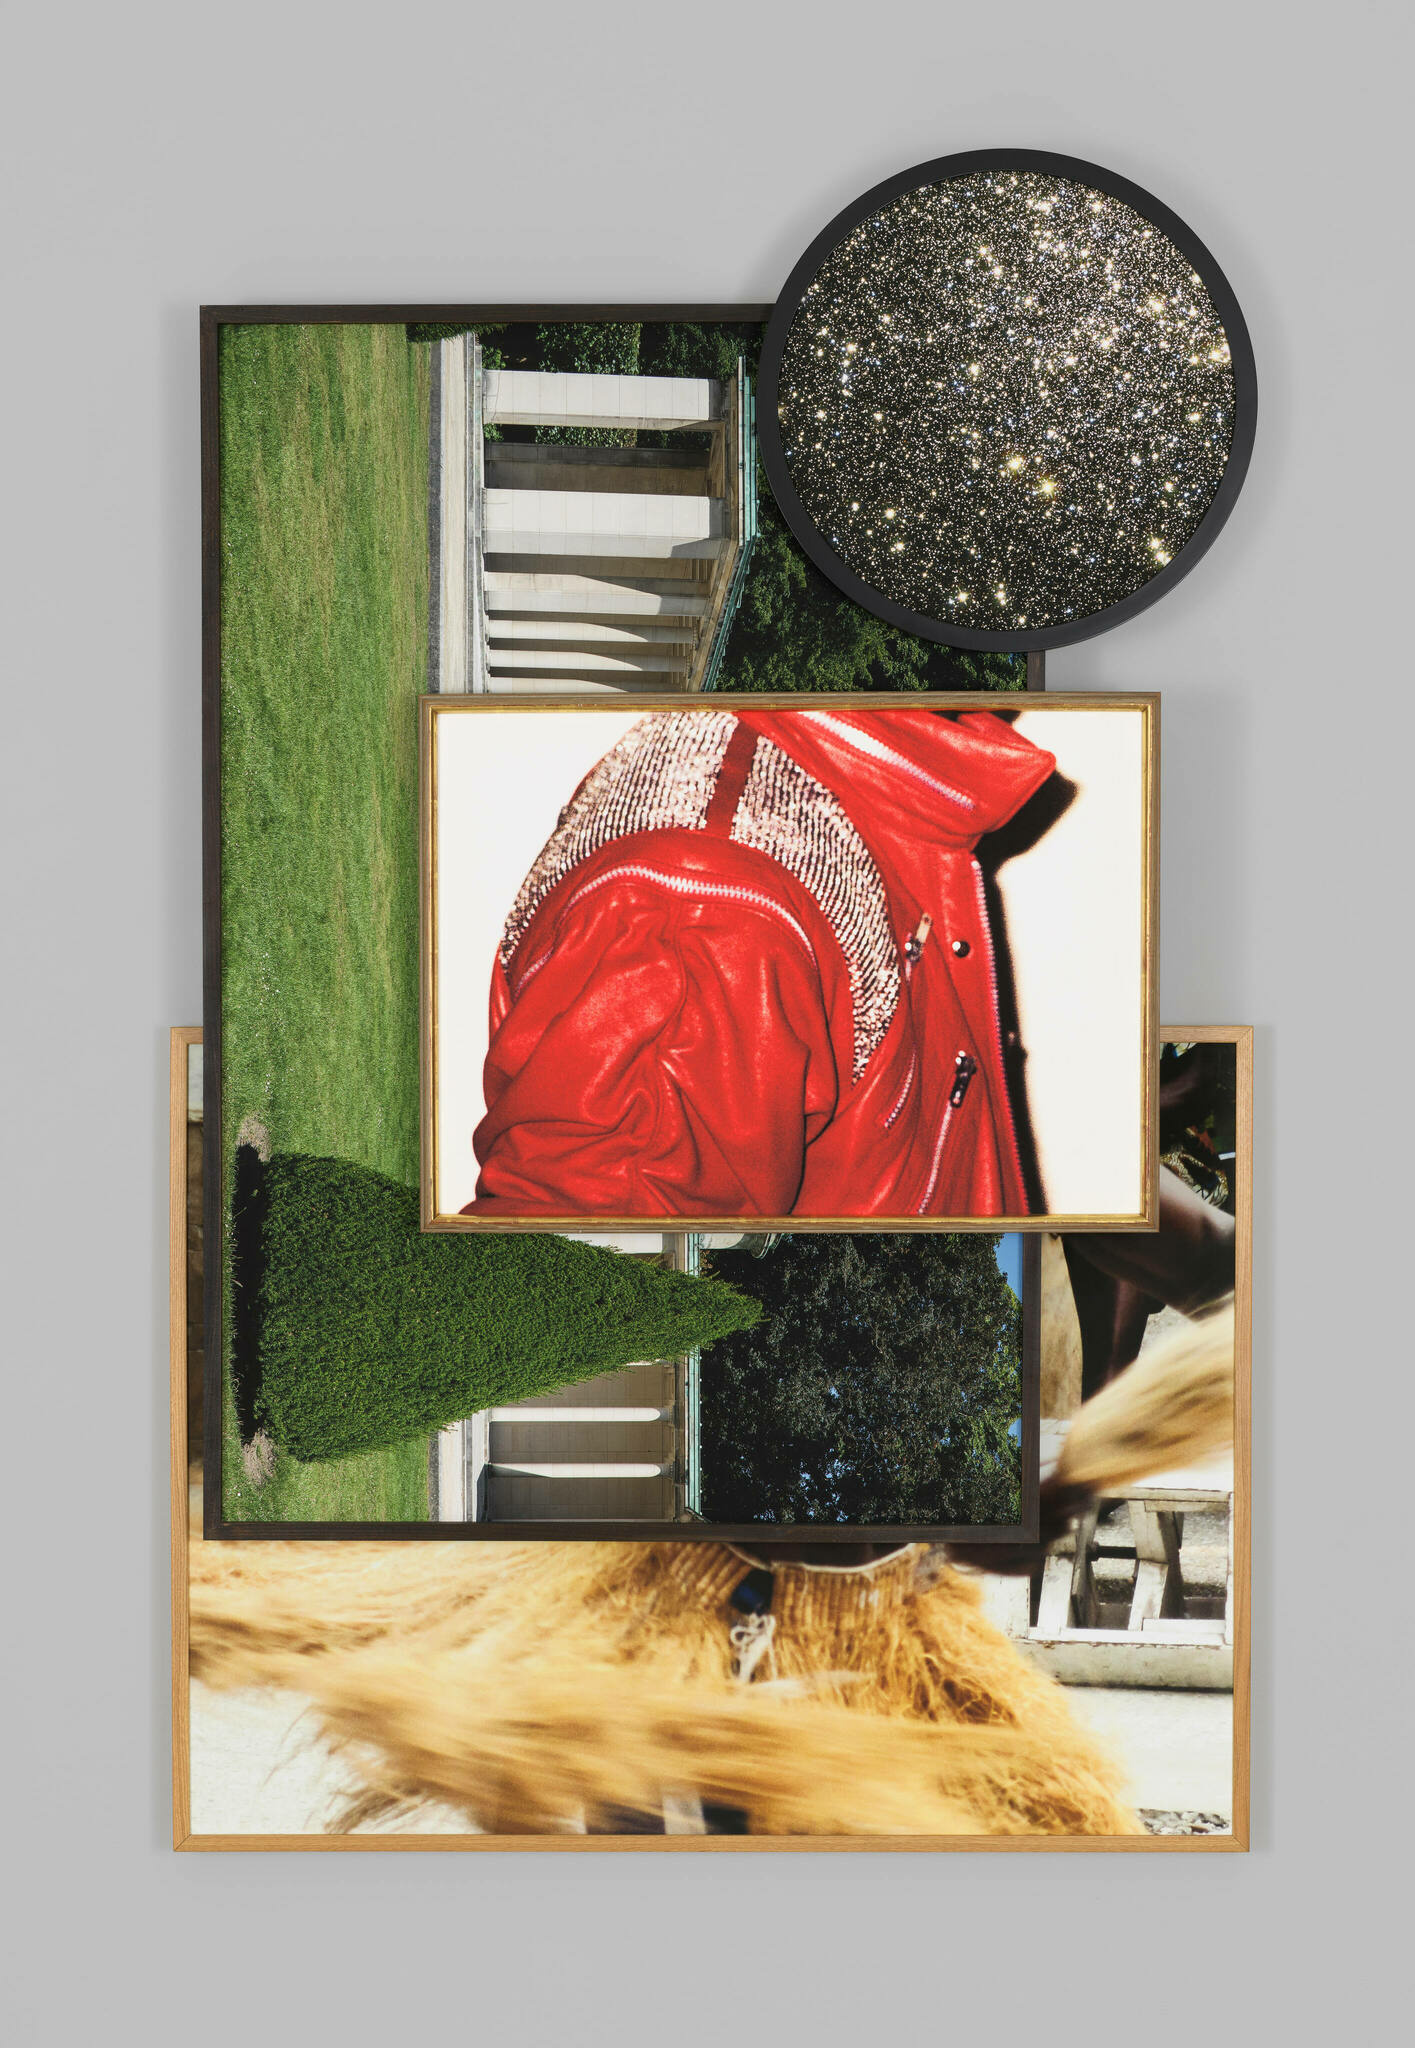 Layered framed photographs of a starry sky, a garden colonnade, an embellished red jacket, and a whirling grass skirt